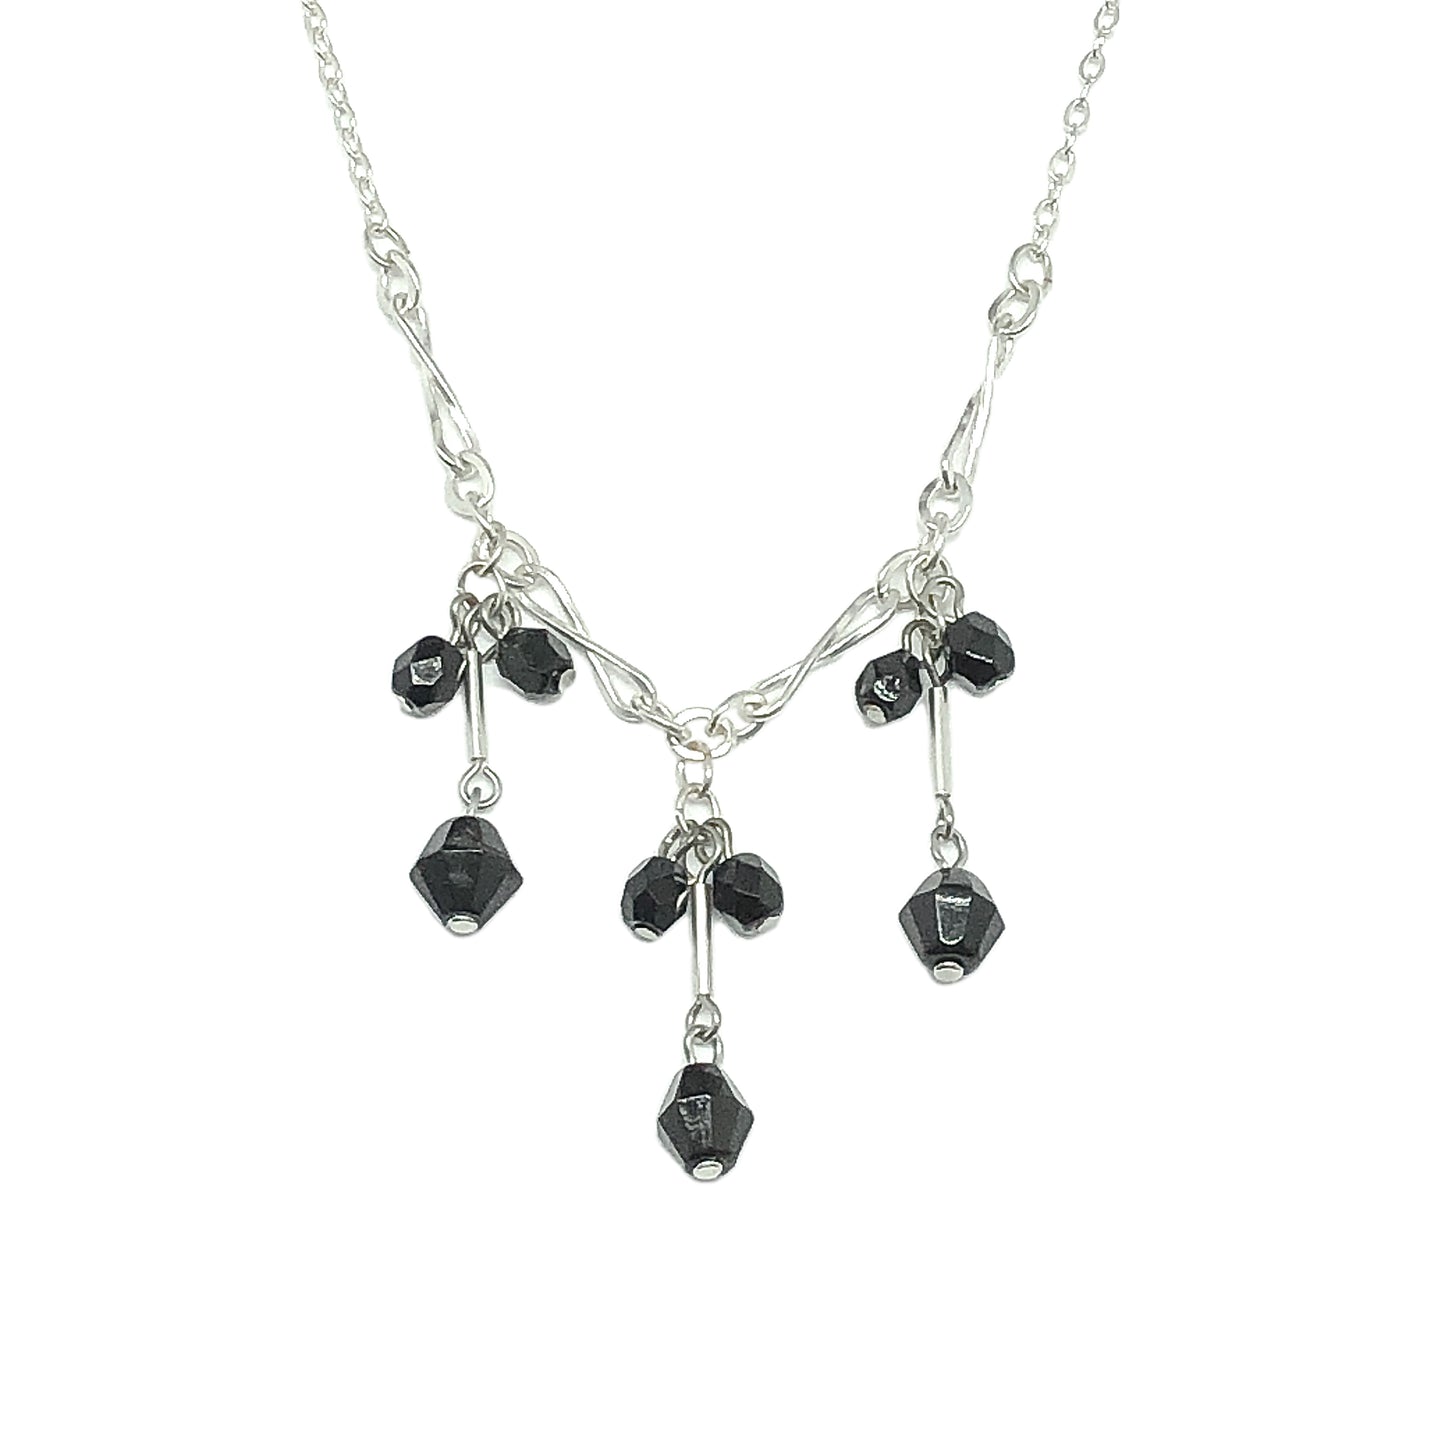 Short 15.75in Sterling Silver Black Crystal Tassel Y Chain Necklace